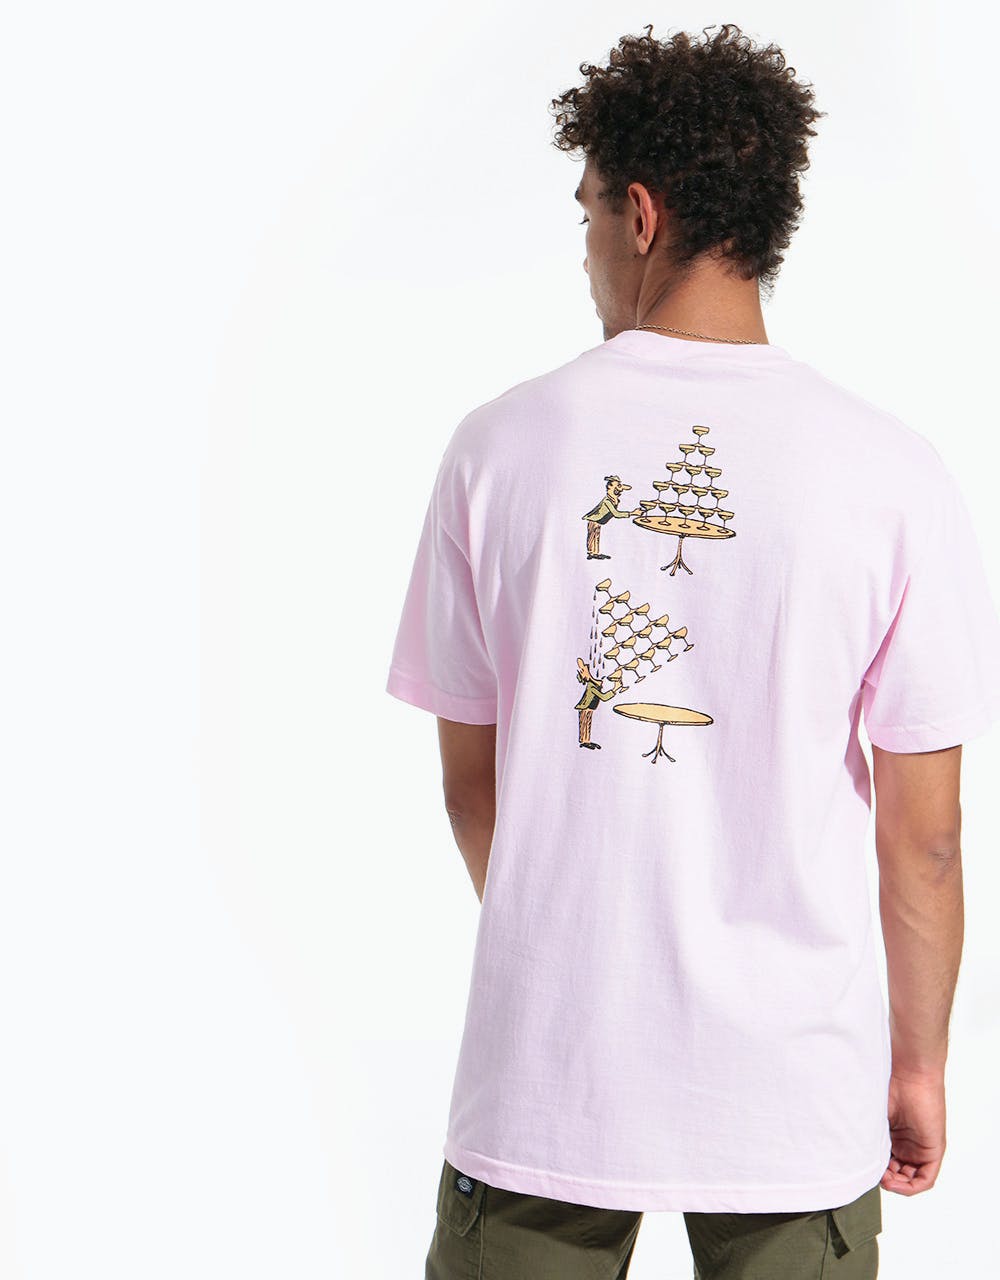 Pass Port Champers T-Shirt - Pink